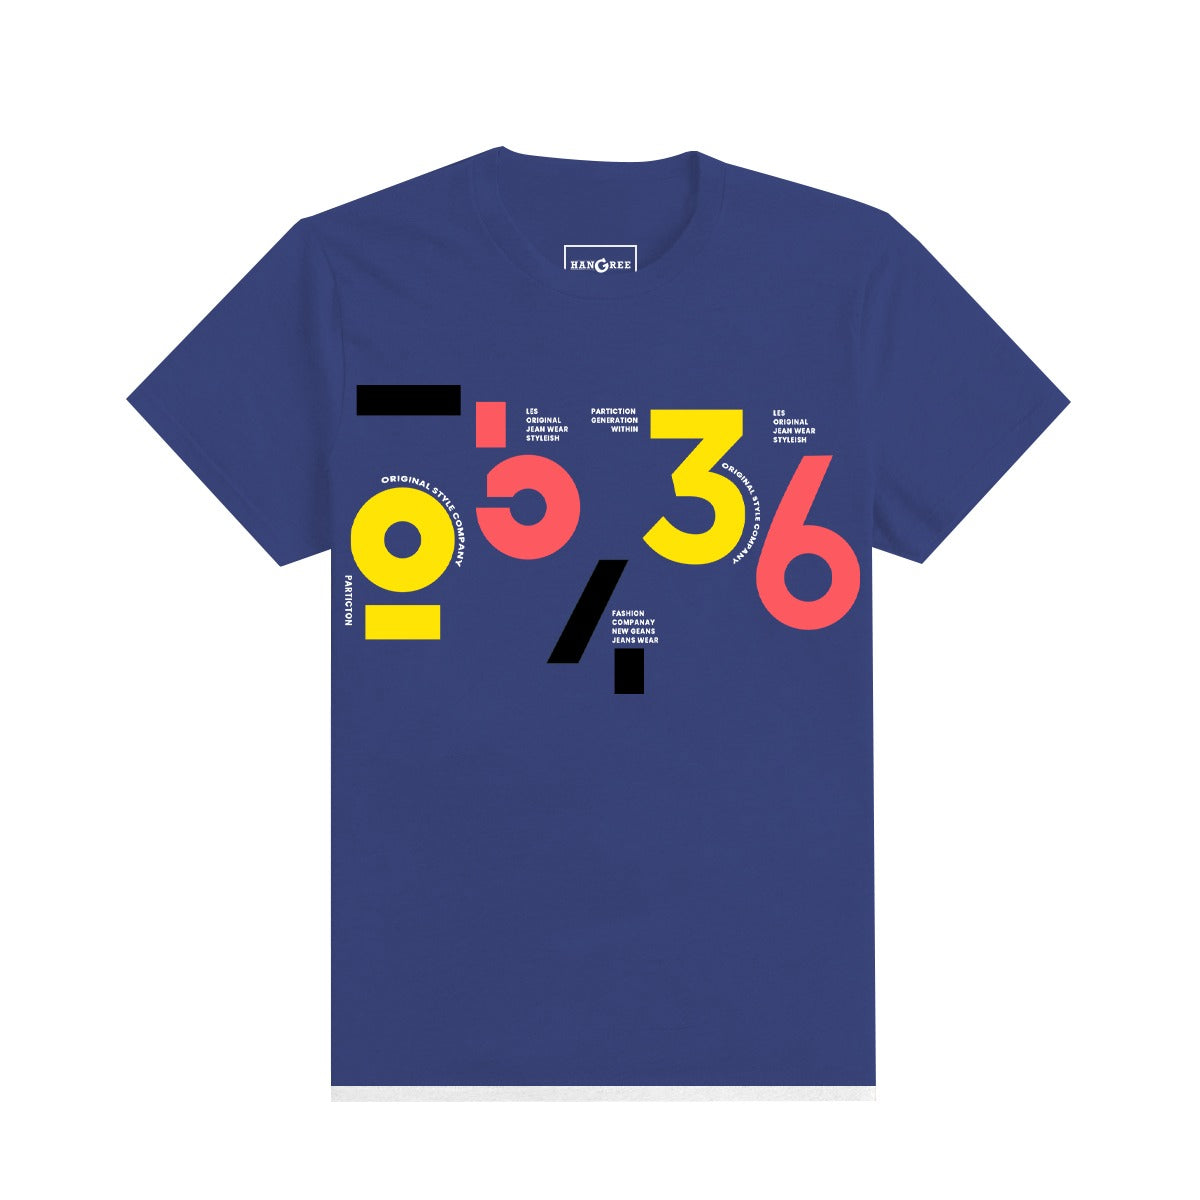 EXCLUSIVE GRAPHIC PRINTED BOY'S TEE SHIRT - NAVY